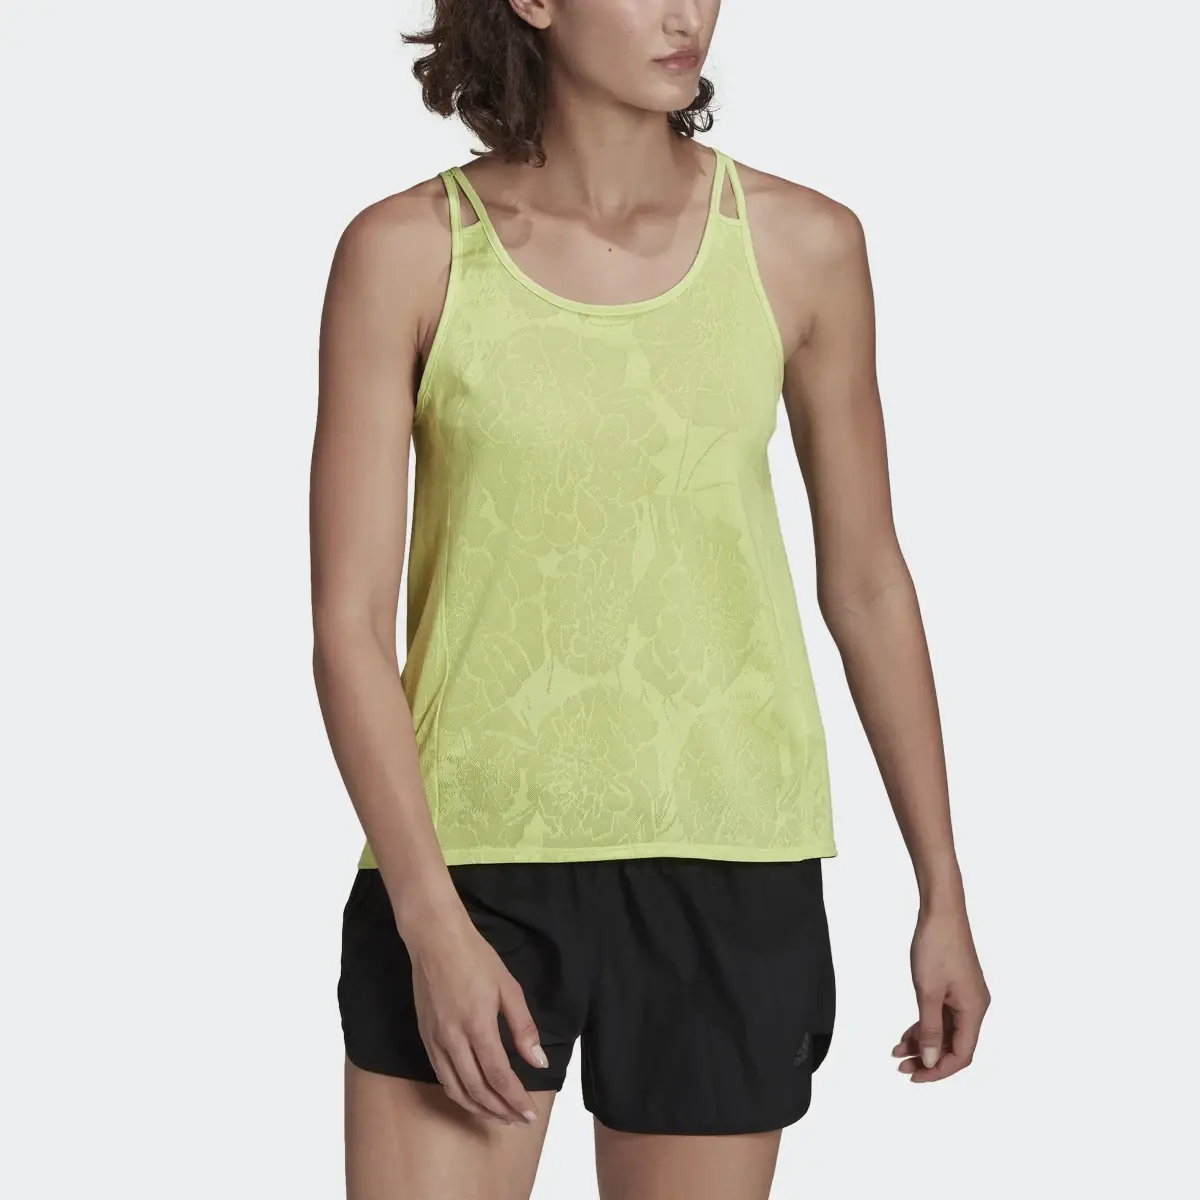 Adidas Made To Be Remade Running Tank Top. 1